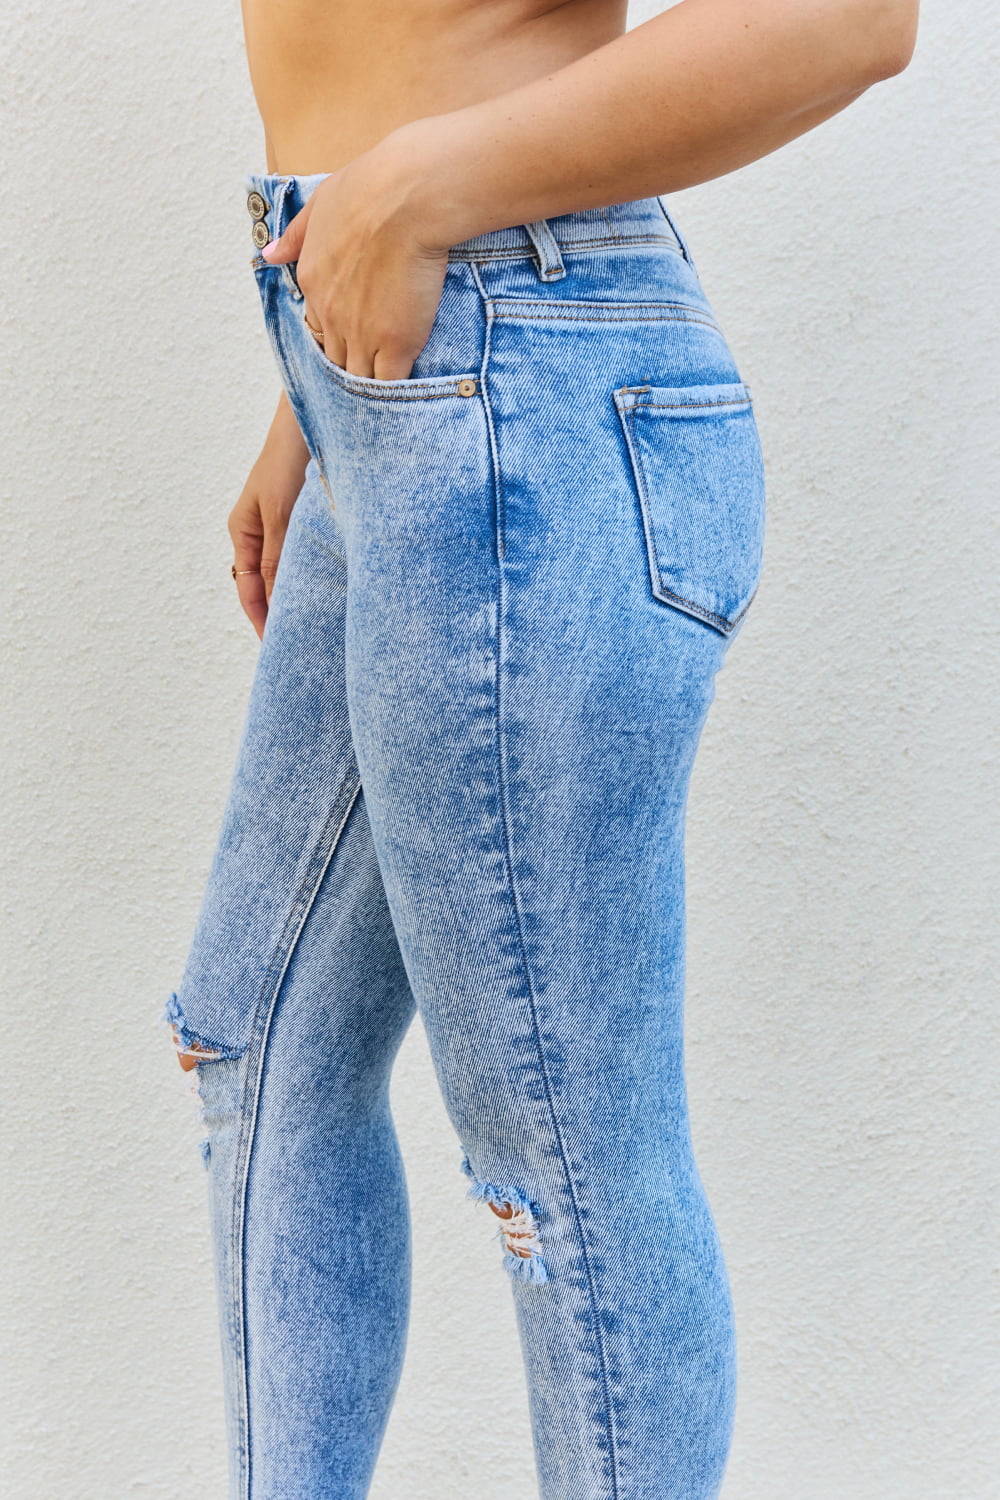 Kancan Emma Full size High Rise Distressed Skinny Jeans- ONLINE ONLY 2-10 DAY SHIPPING